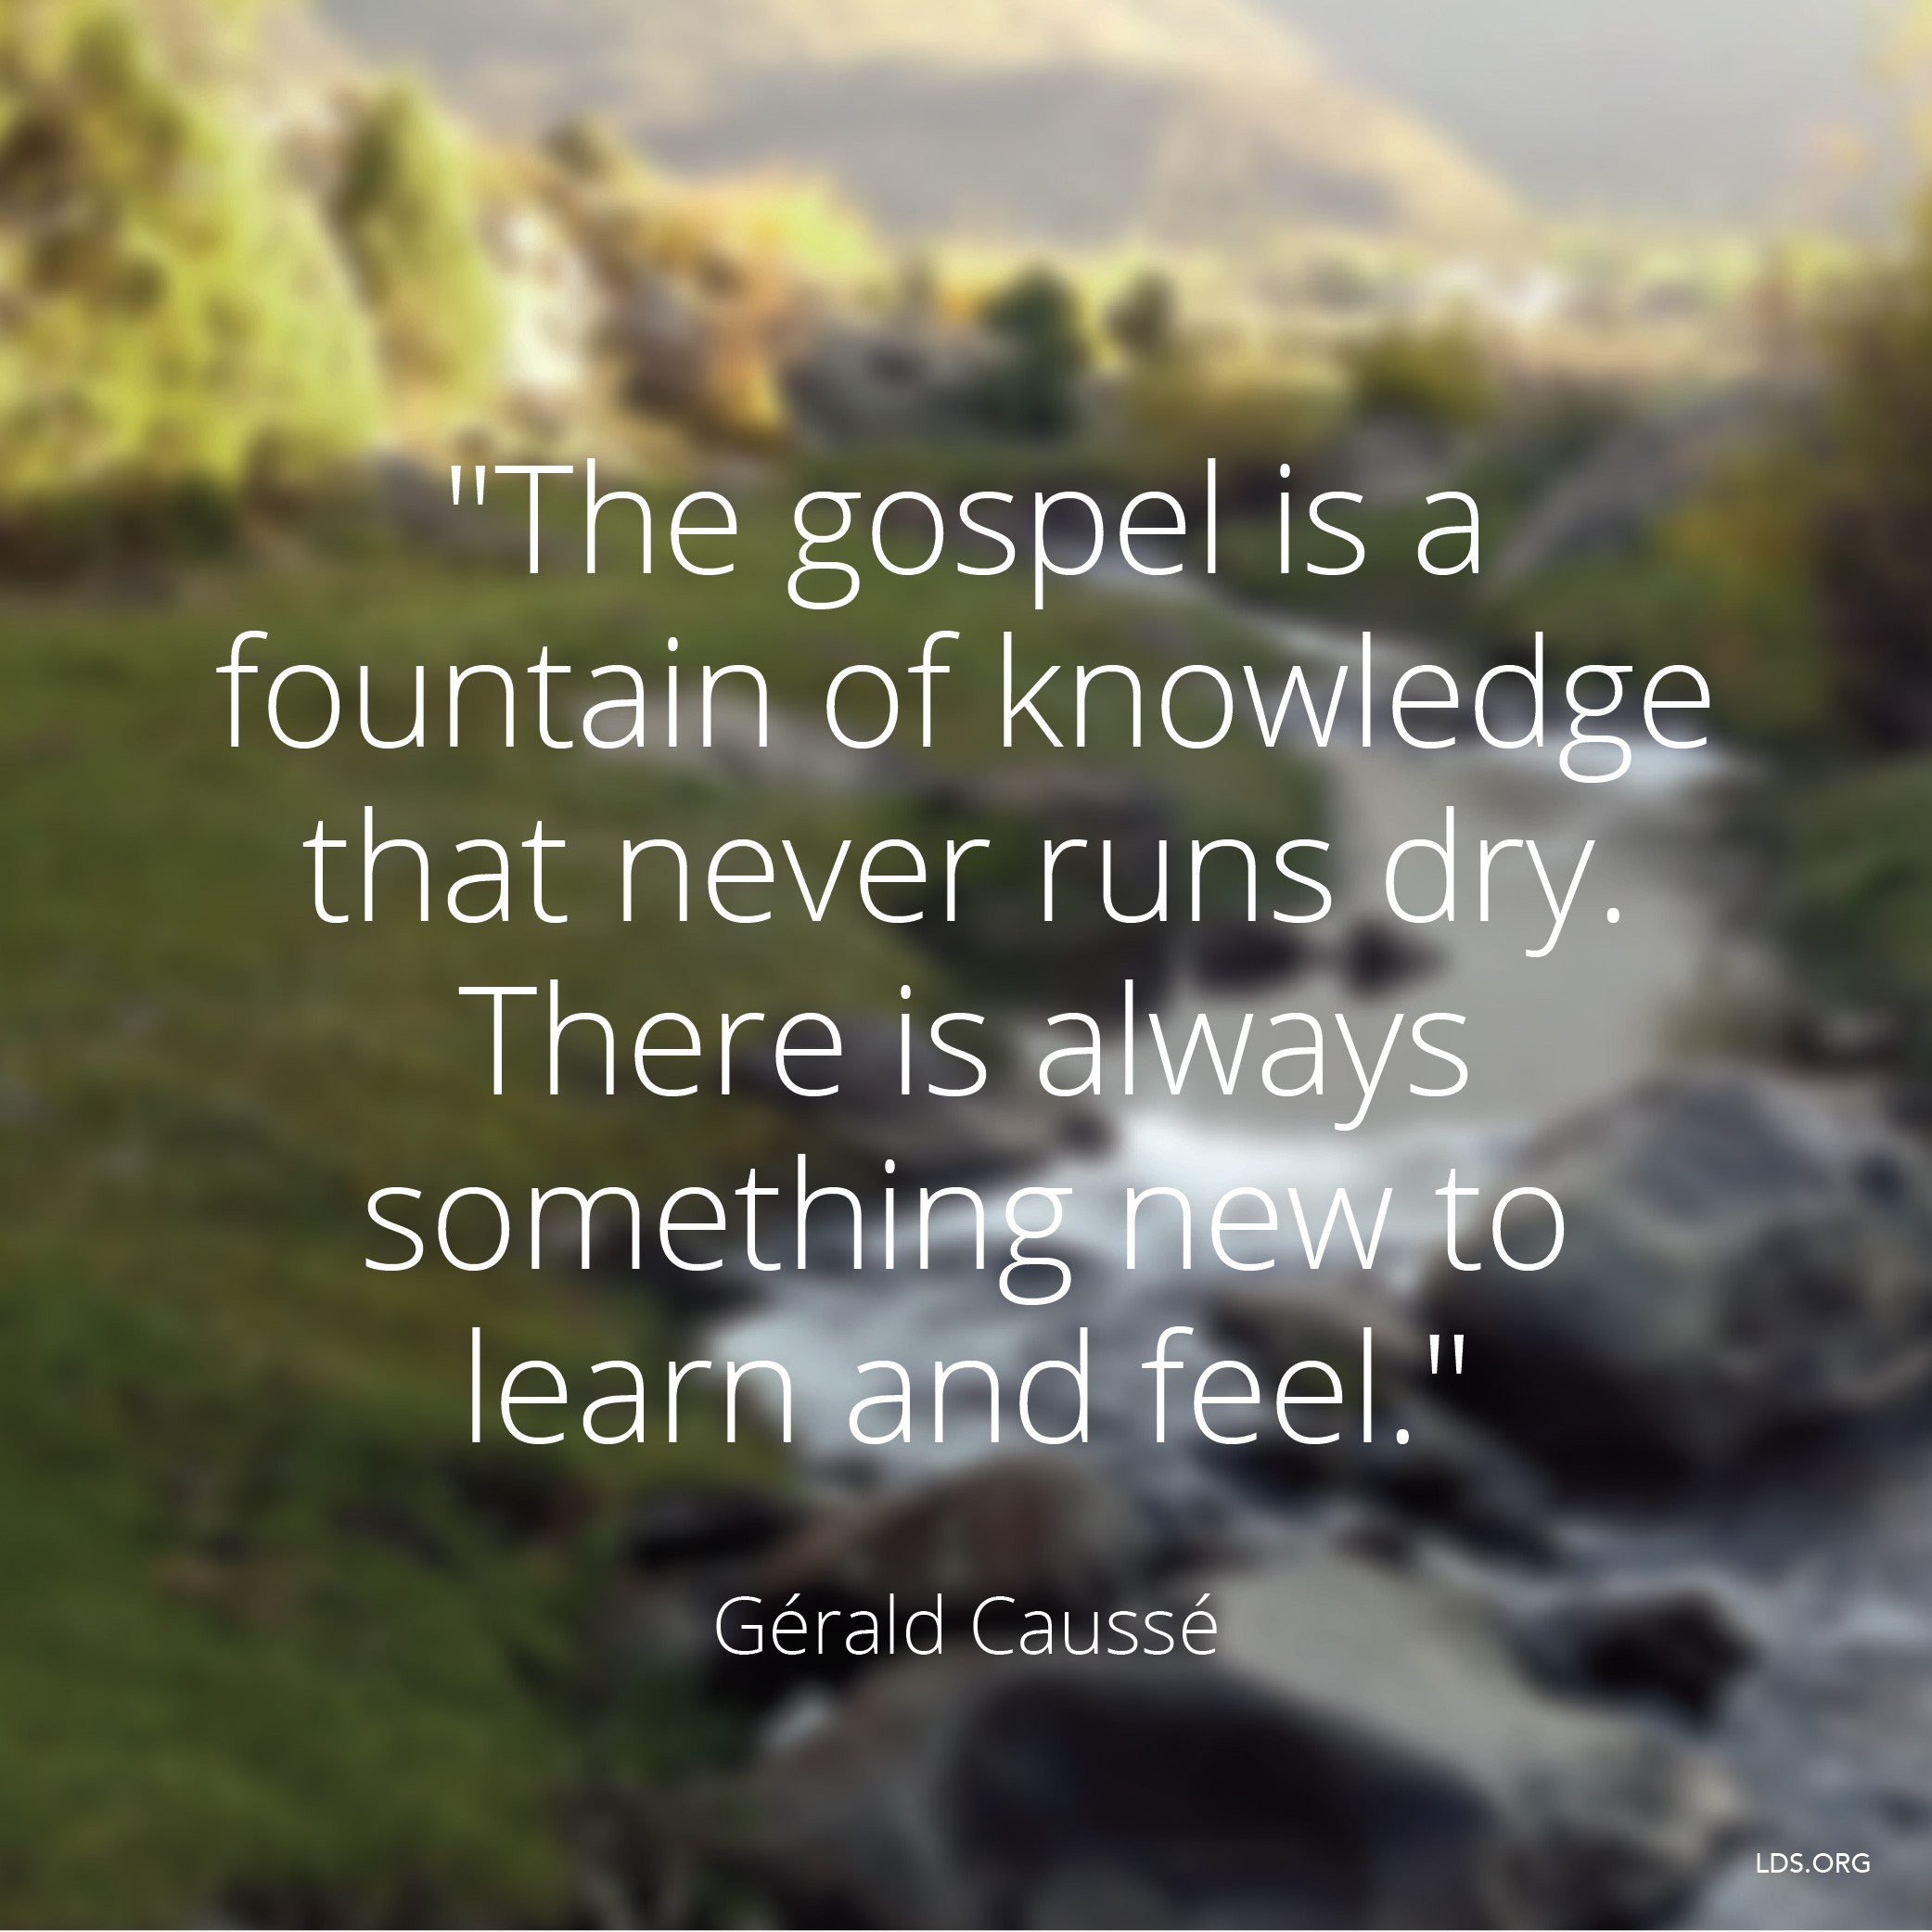 An image of a river running down a hill, combined with a text overlay quoting Bishop Gérald Caussé: “The gospel is a fountain of knowledge.”